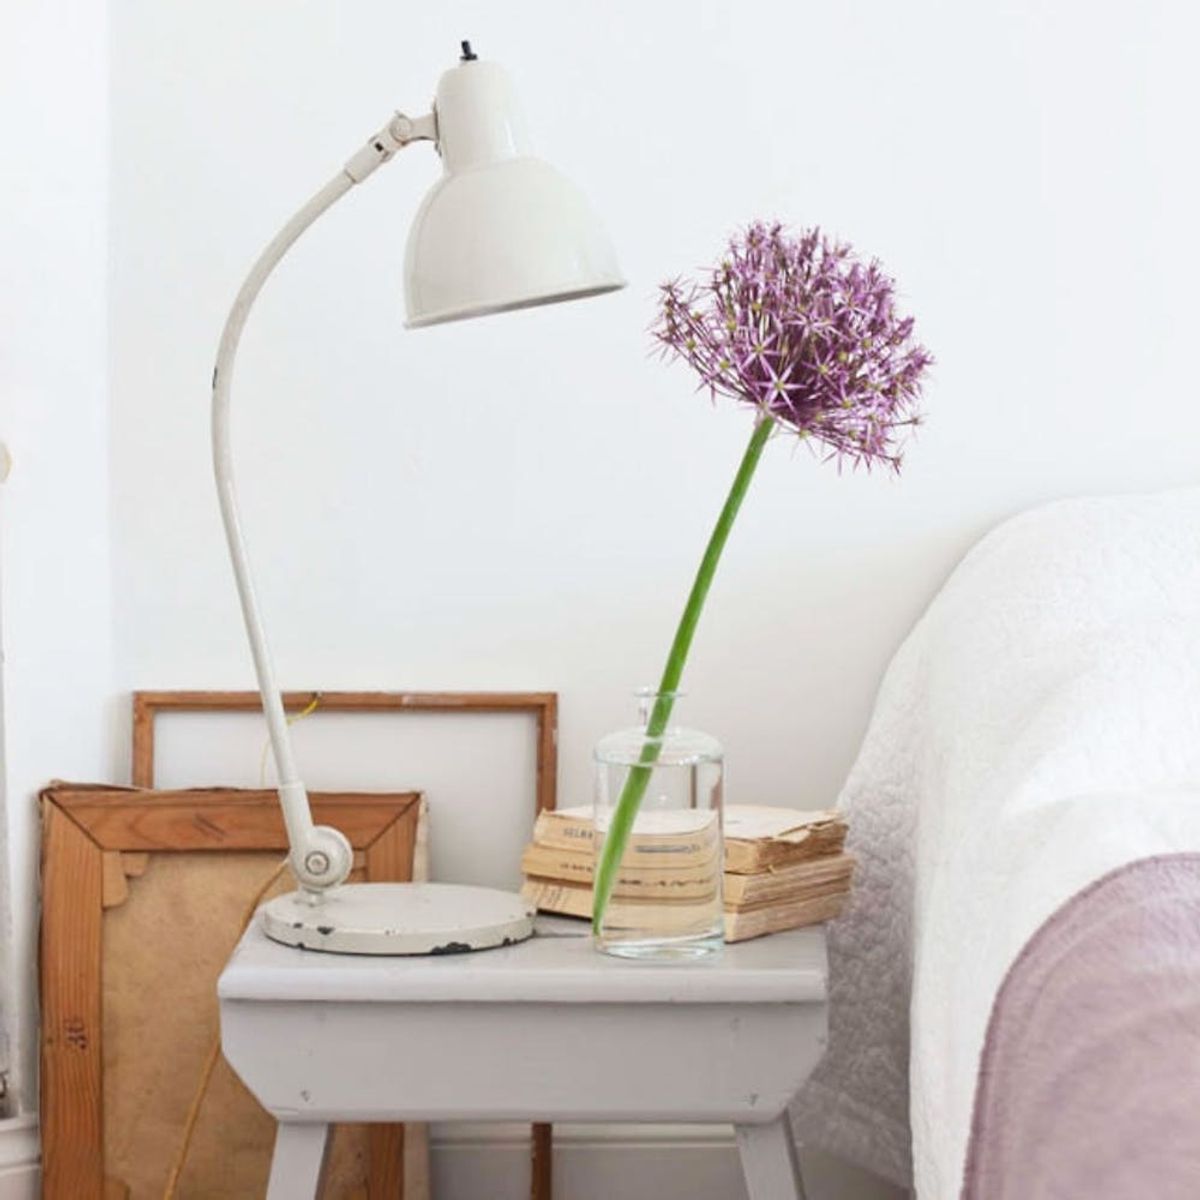 This Home Decor Color Trend Will Rule in 2016, According to Pinterest